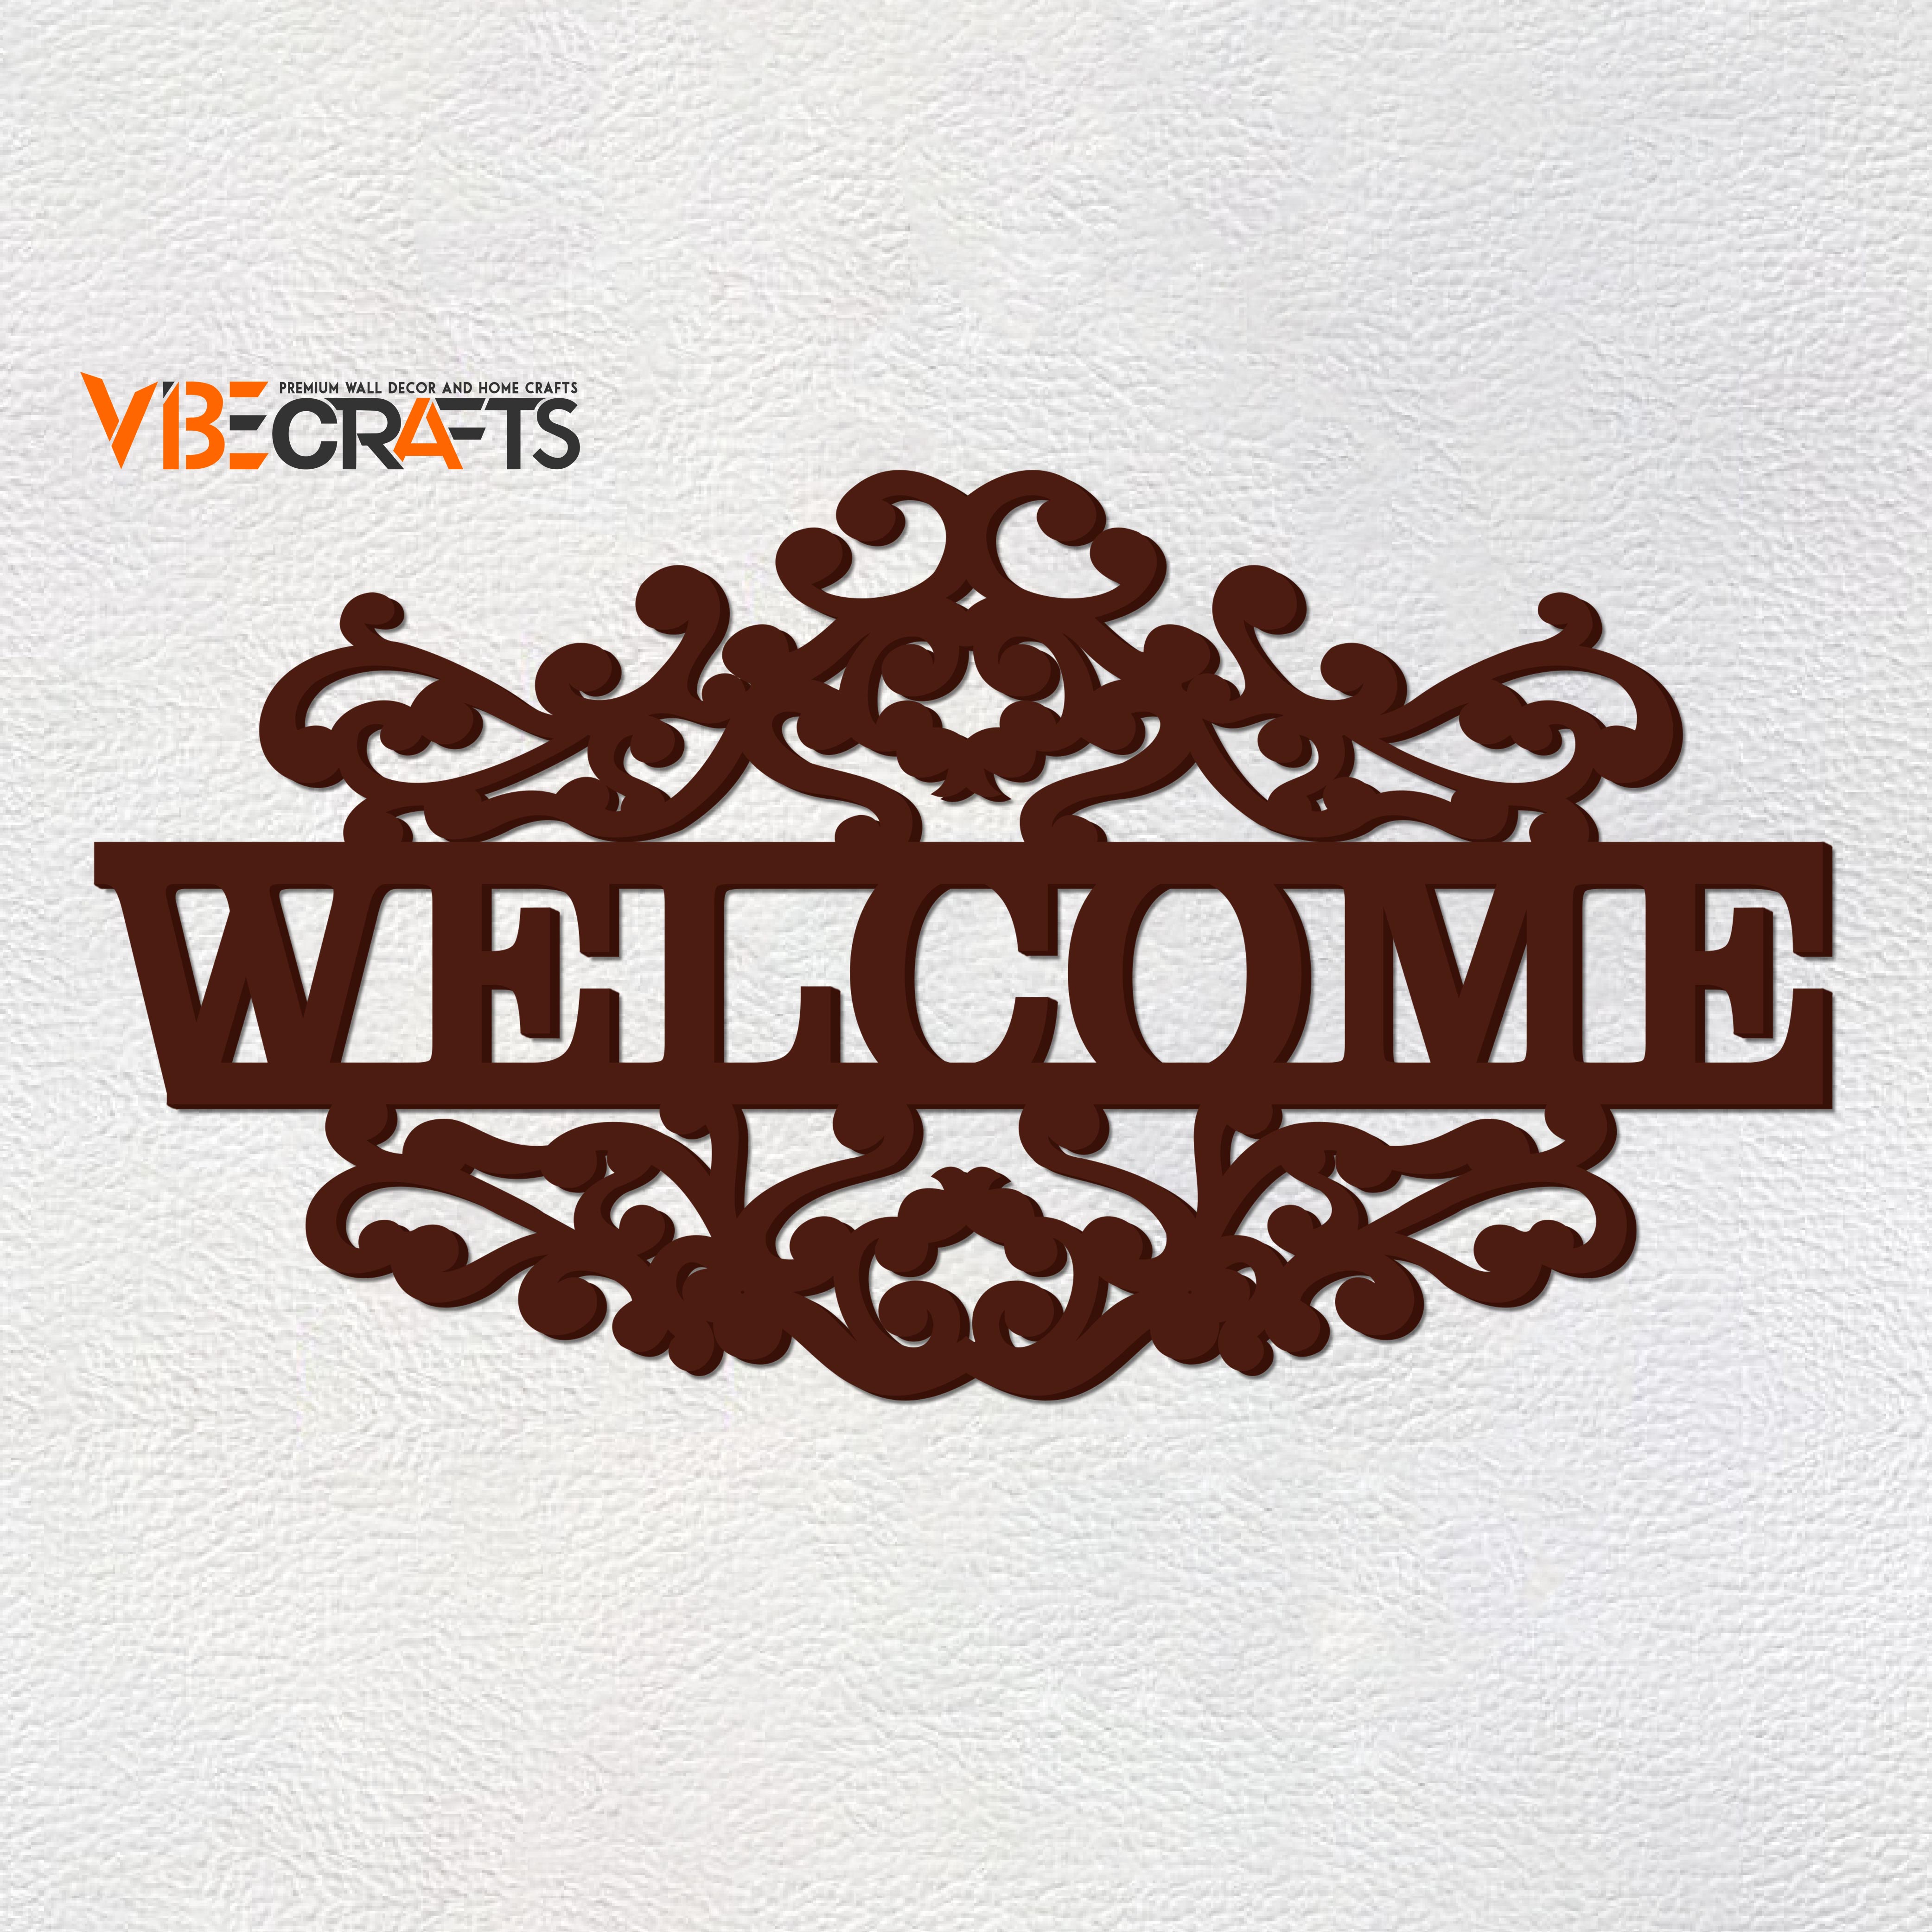 Beautiful Welcome in Mahogany Brown Color Design Wooden Wall Hanging